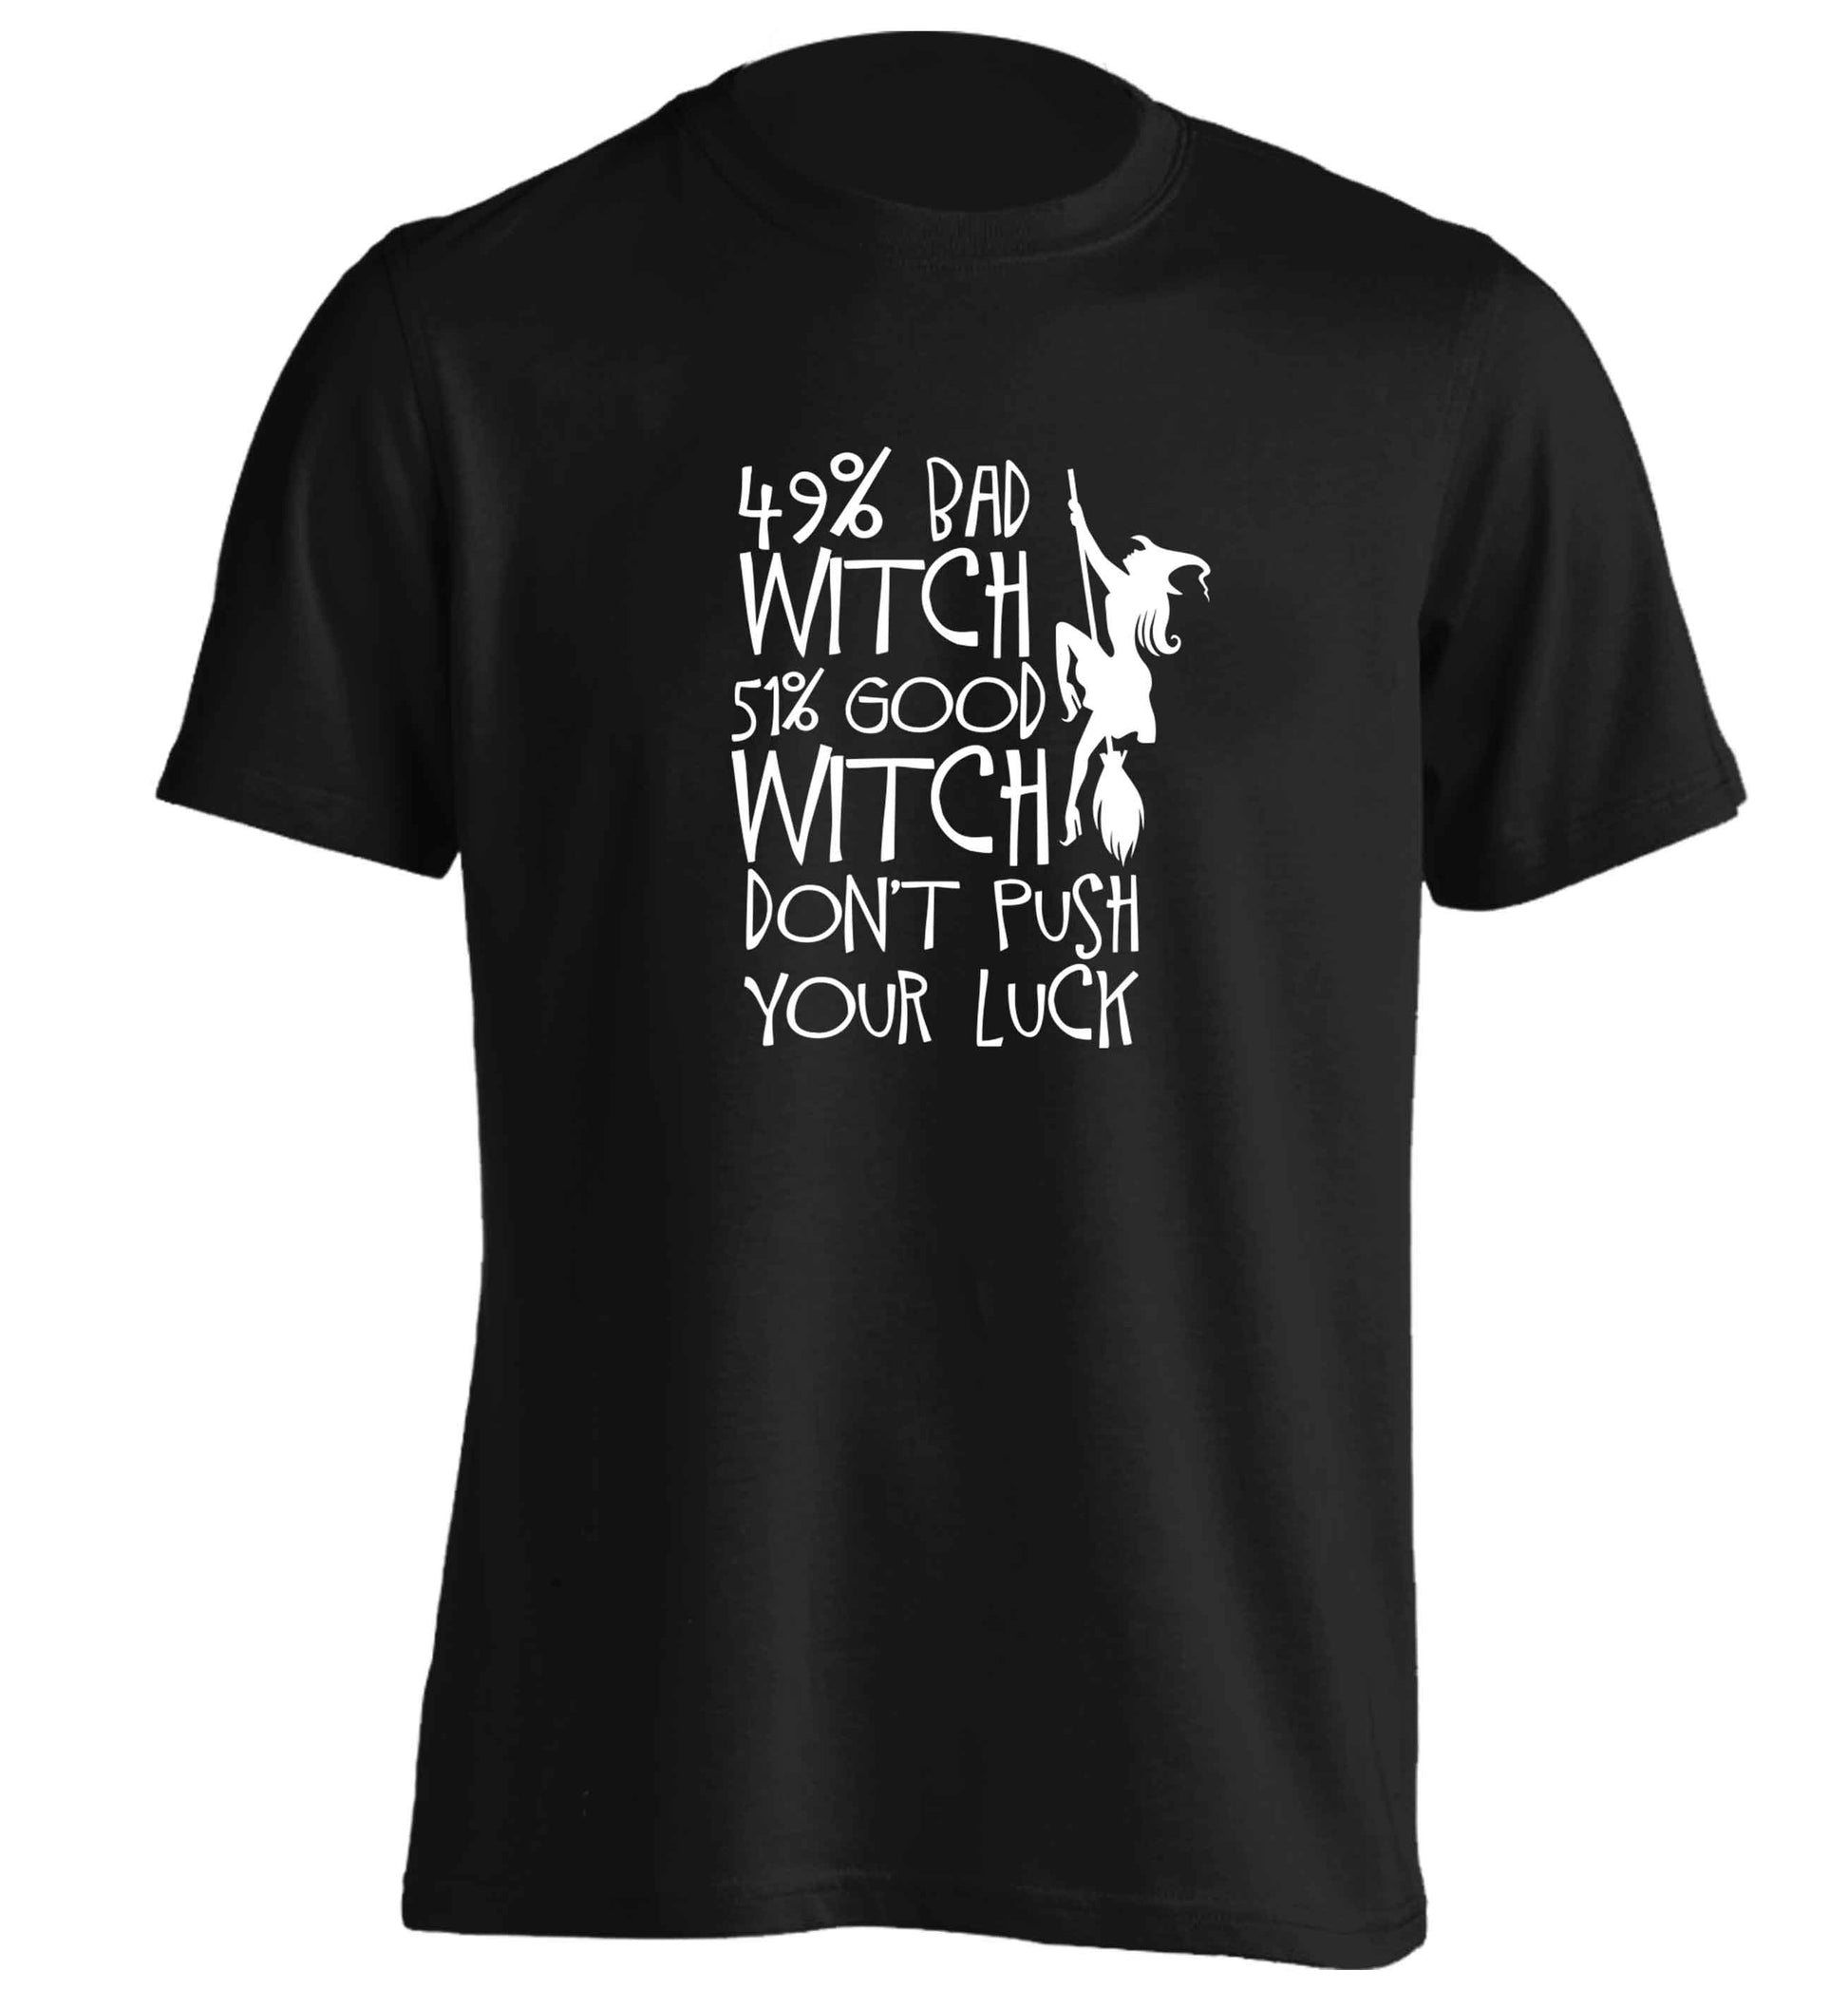 49% bad witch 51% good witch don't push your luck adults unisex black Tshirt 2XL